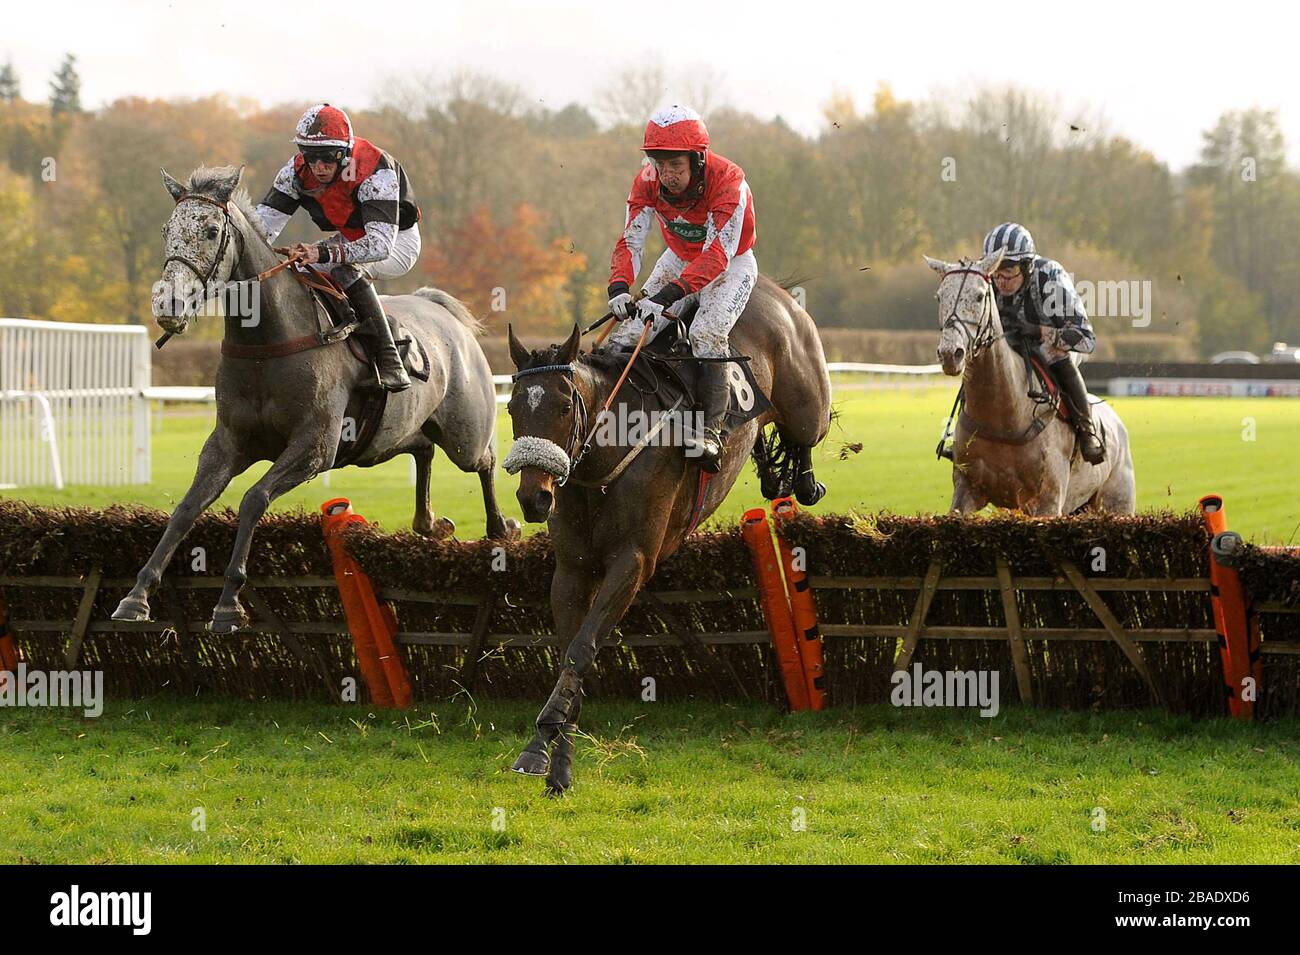 Buddy Love ridden by Alain Cawley (left), Rulbin Realta ridden by Colin Bolger and Lisselan Pleasure ridden by Donal Fahy (right) in action in the William Hill 'the Jumps' Enter Today Mares' Novices' Hurdle Stock Photo